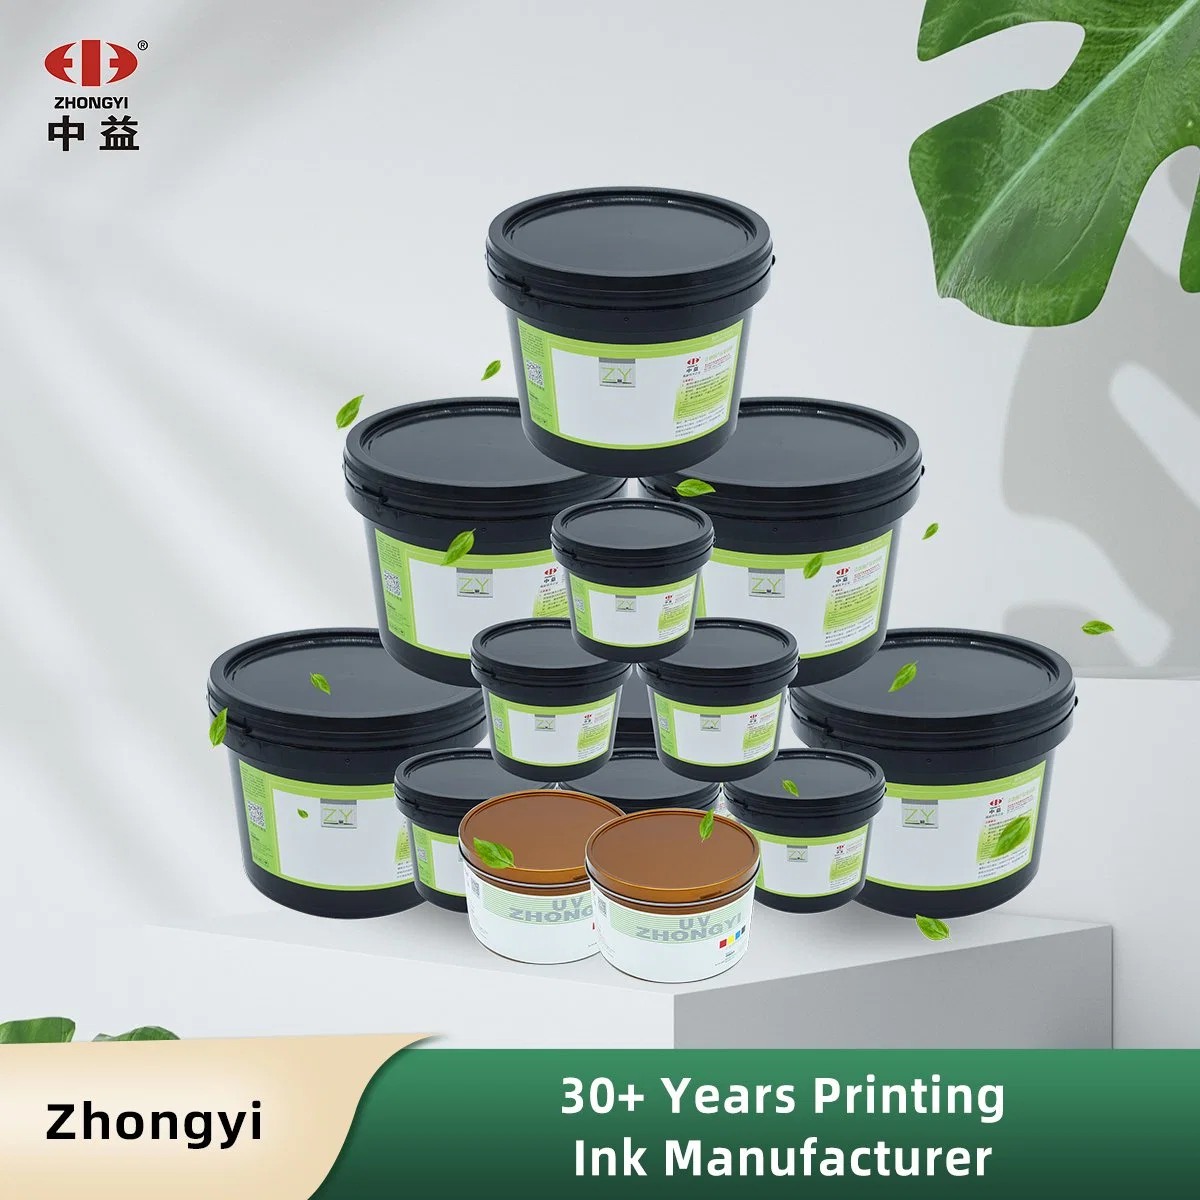 Zhongyi Uvu Series Paper Ink for High-End Packaging Boxes for Cosmetics; Cigarette Bags, Wine Bags